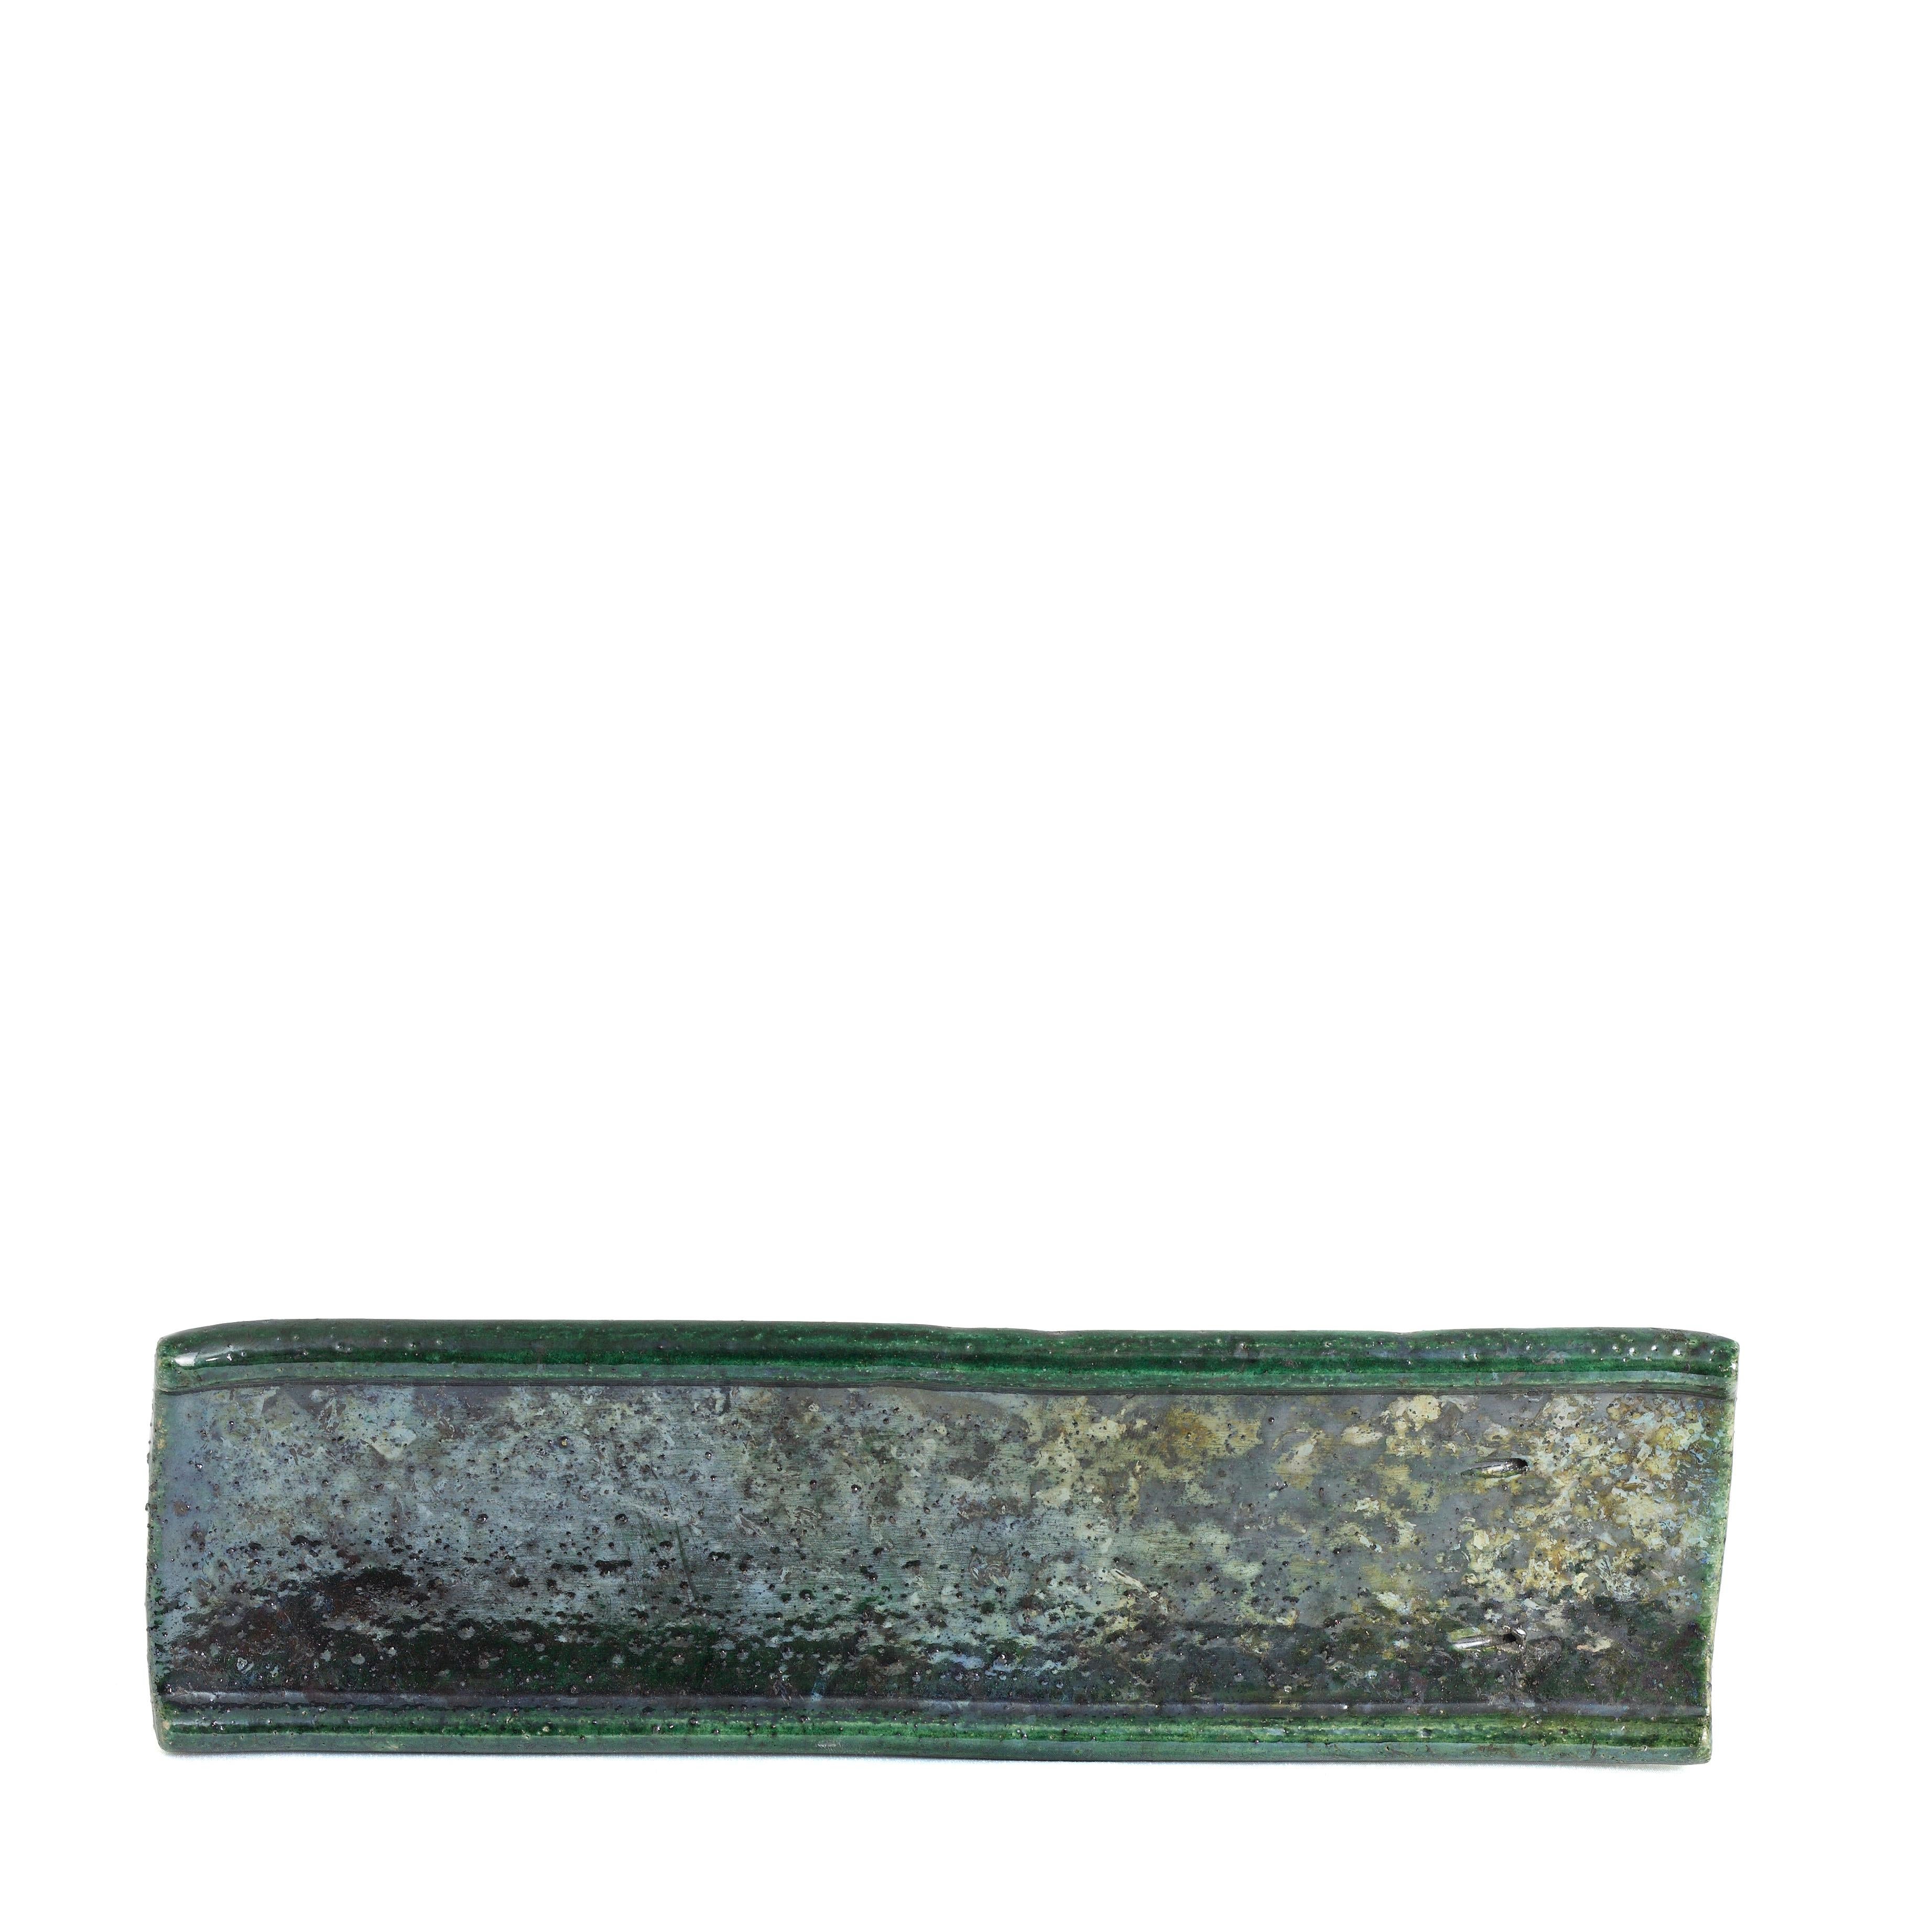 Japanese Modern Incenso Incense Holders Raku Ceramics Green Copper In New Condition For Sale In monza, Monza and Brianza